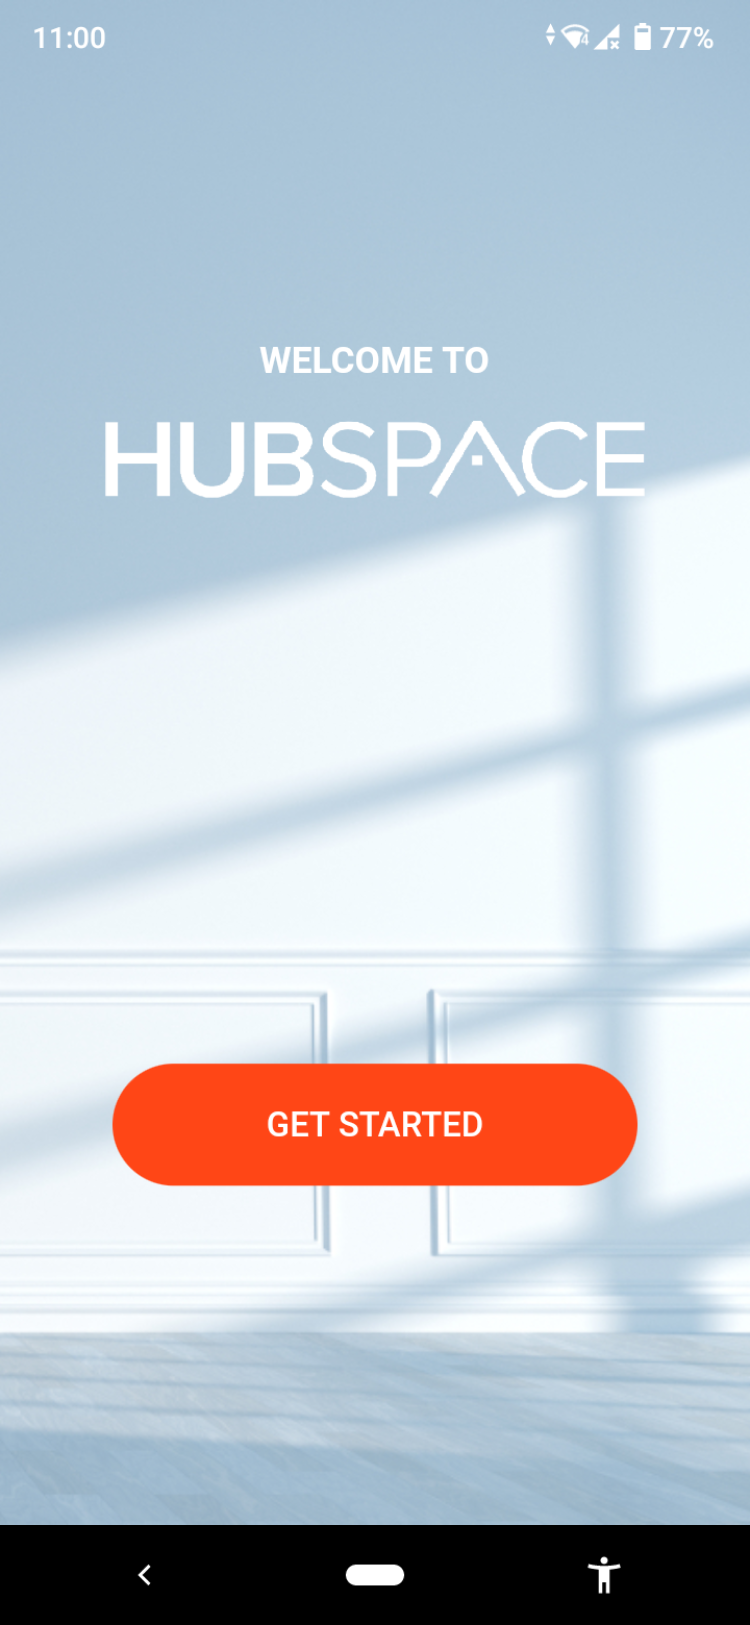 Hubspace app showing welcome screen